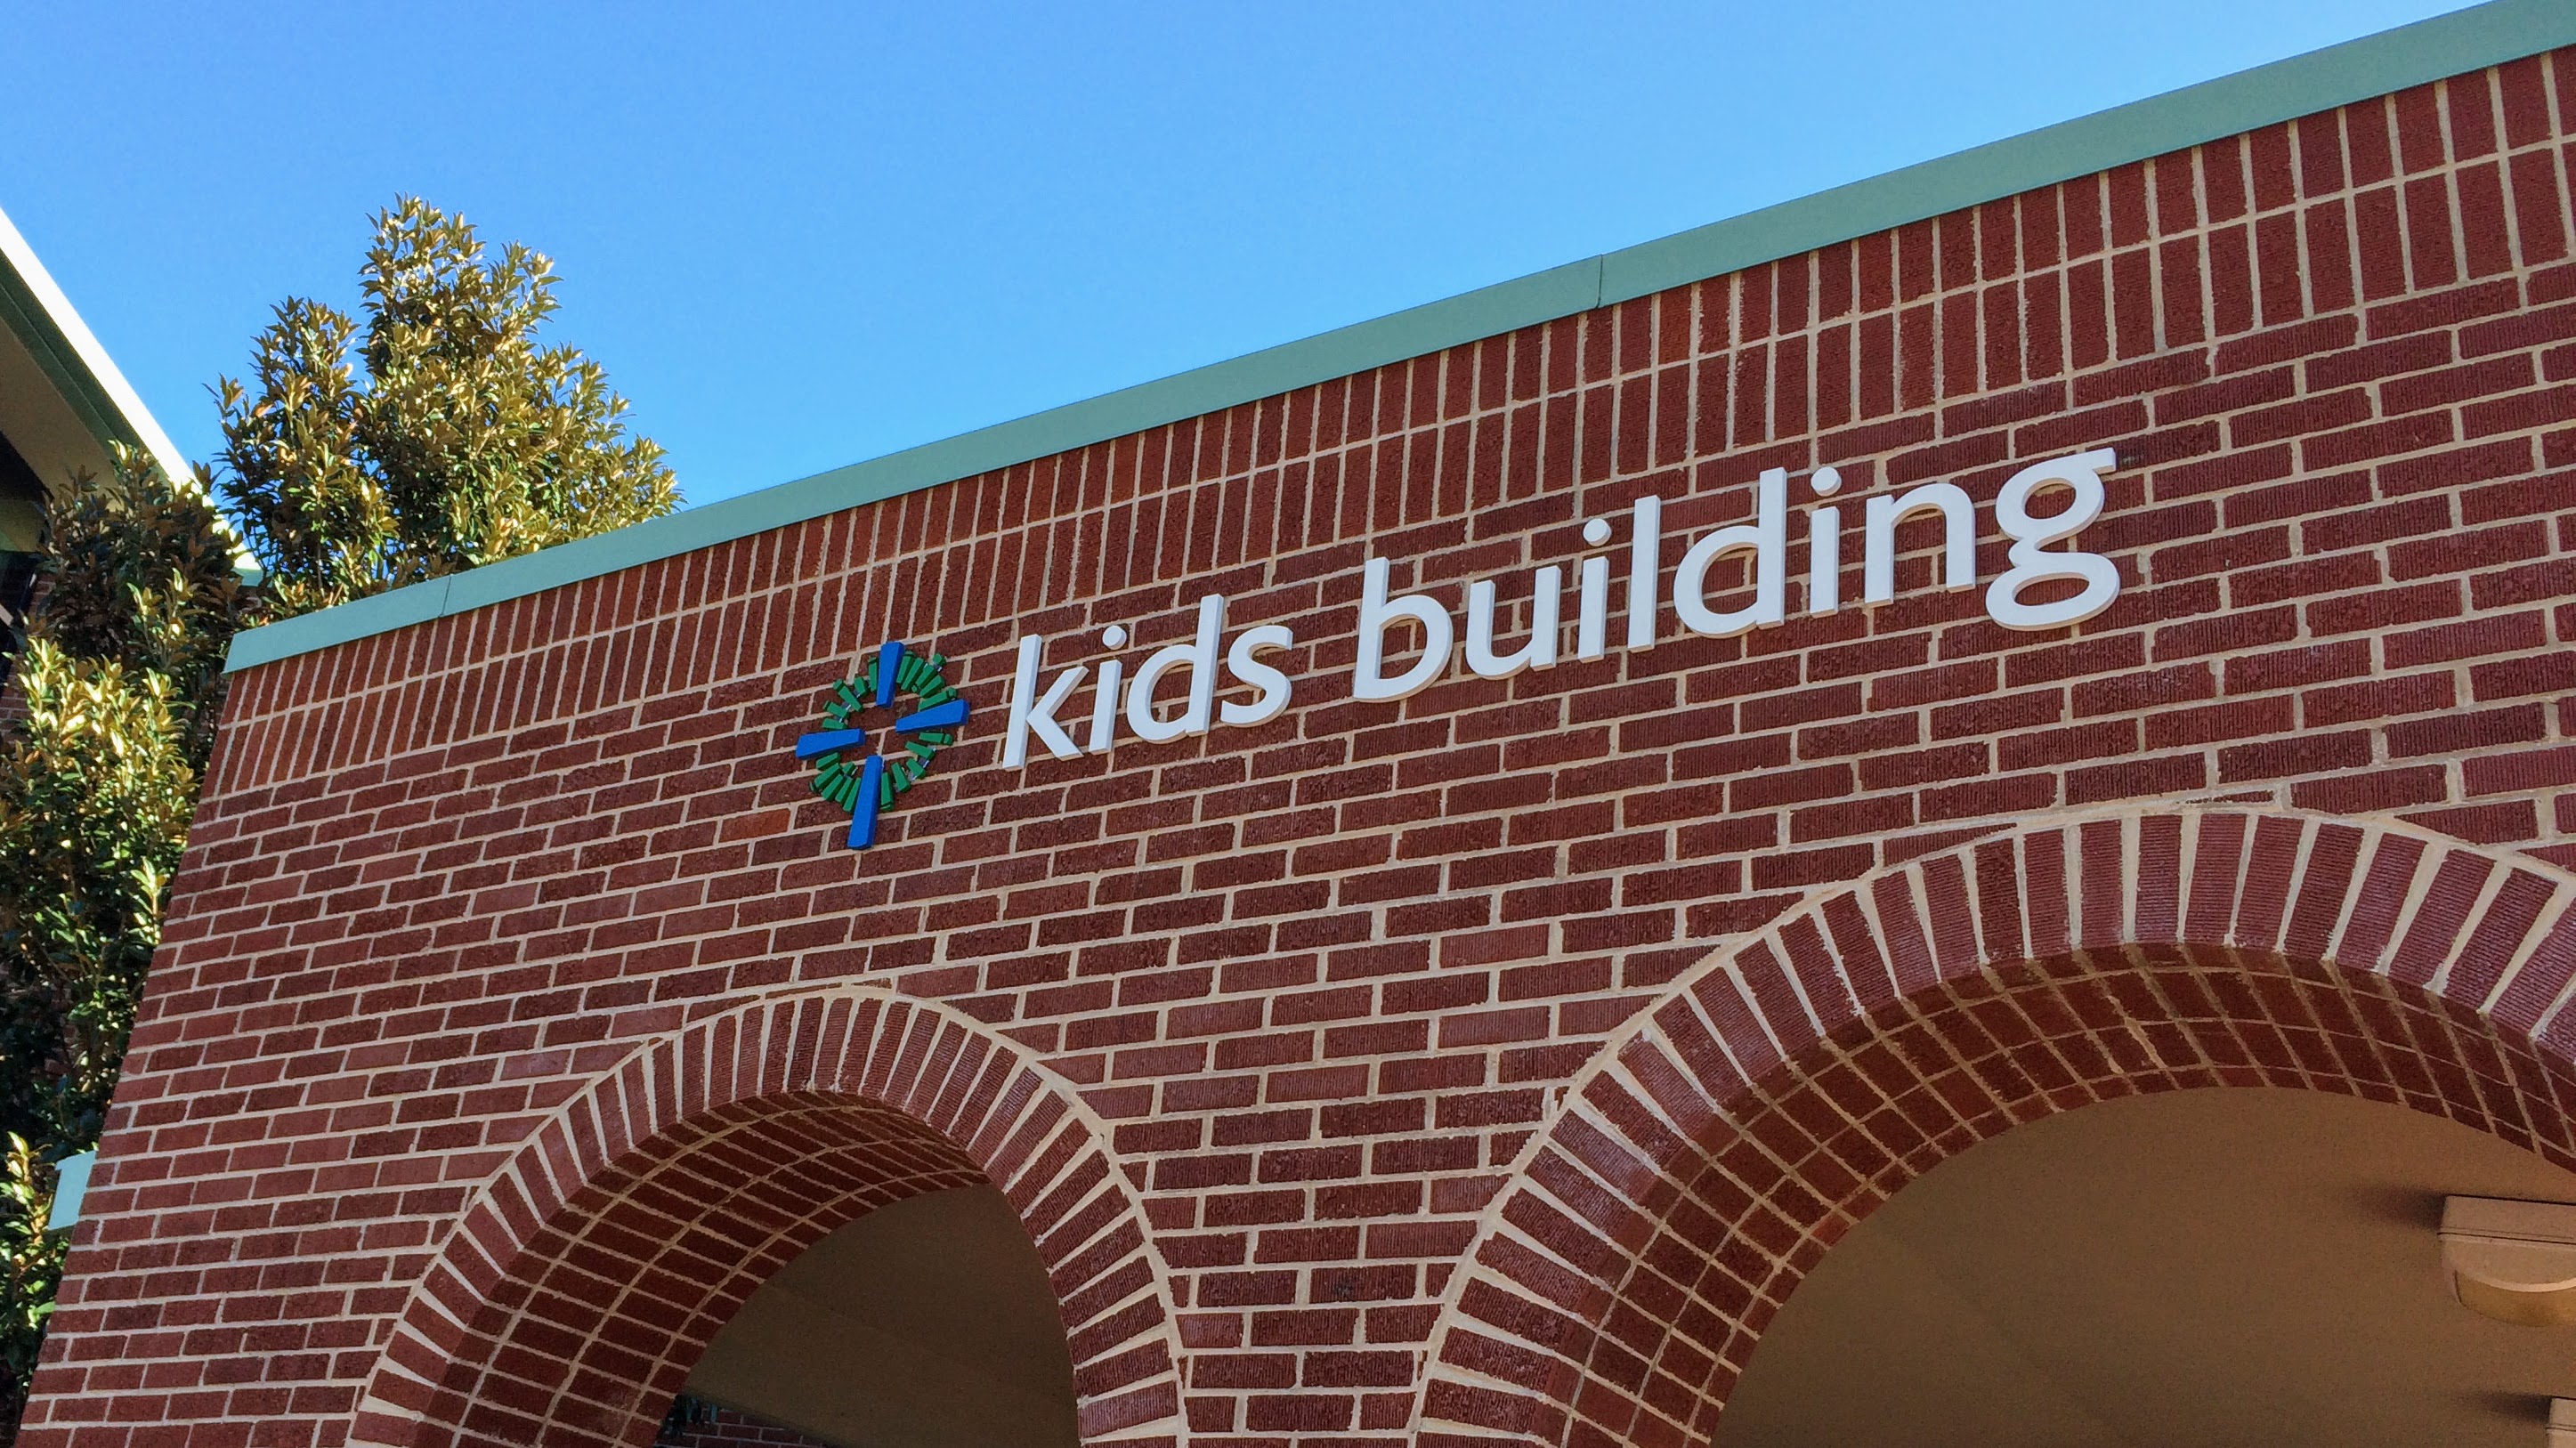 Exterior wayfinding for kids building on church campus with dimensional letters - signgeek Wayfinding 